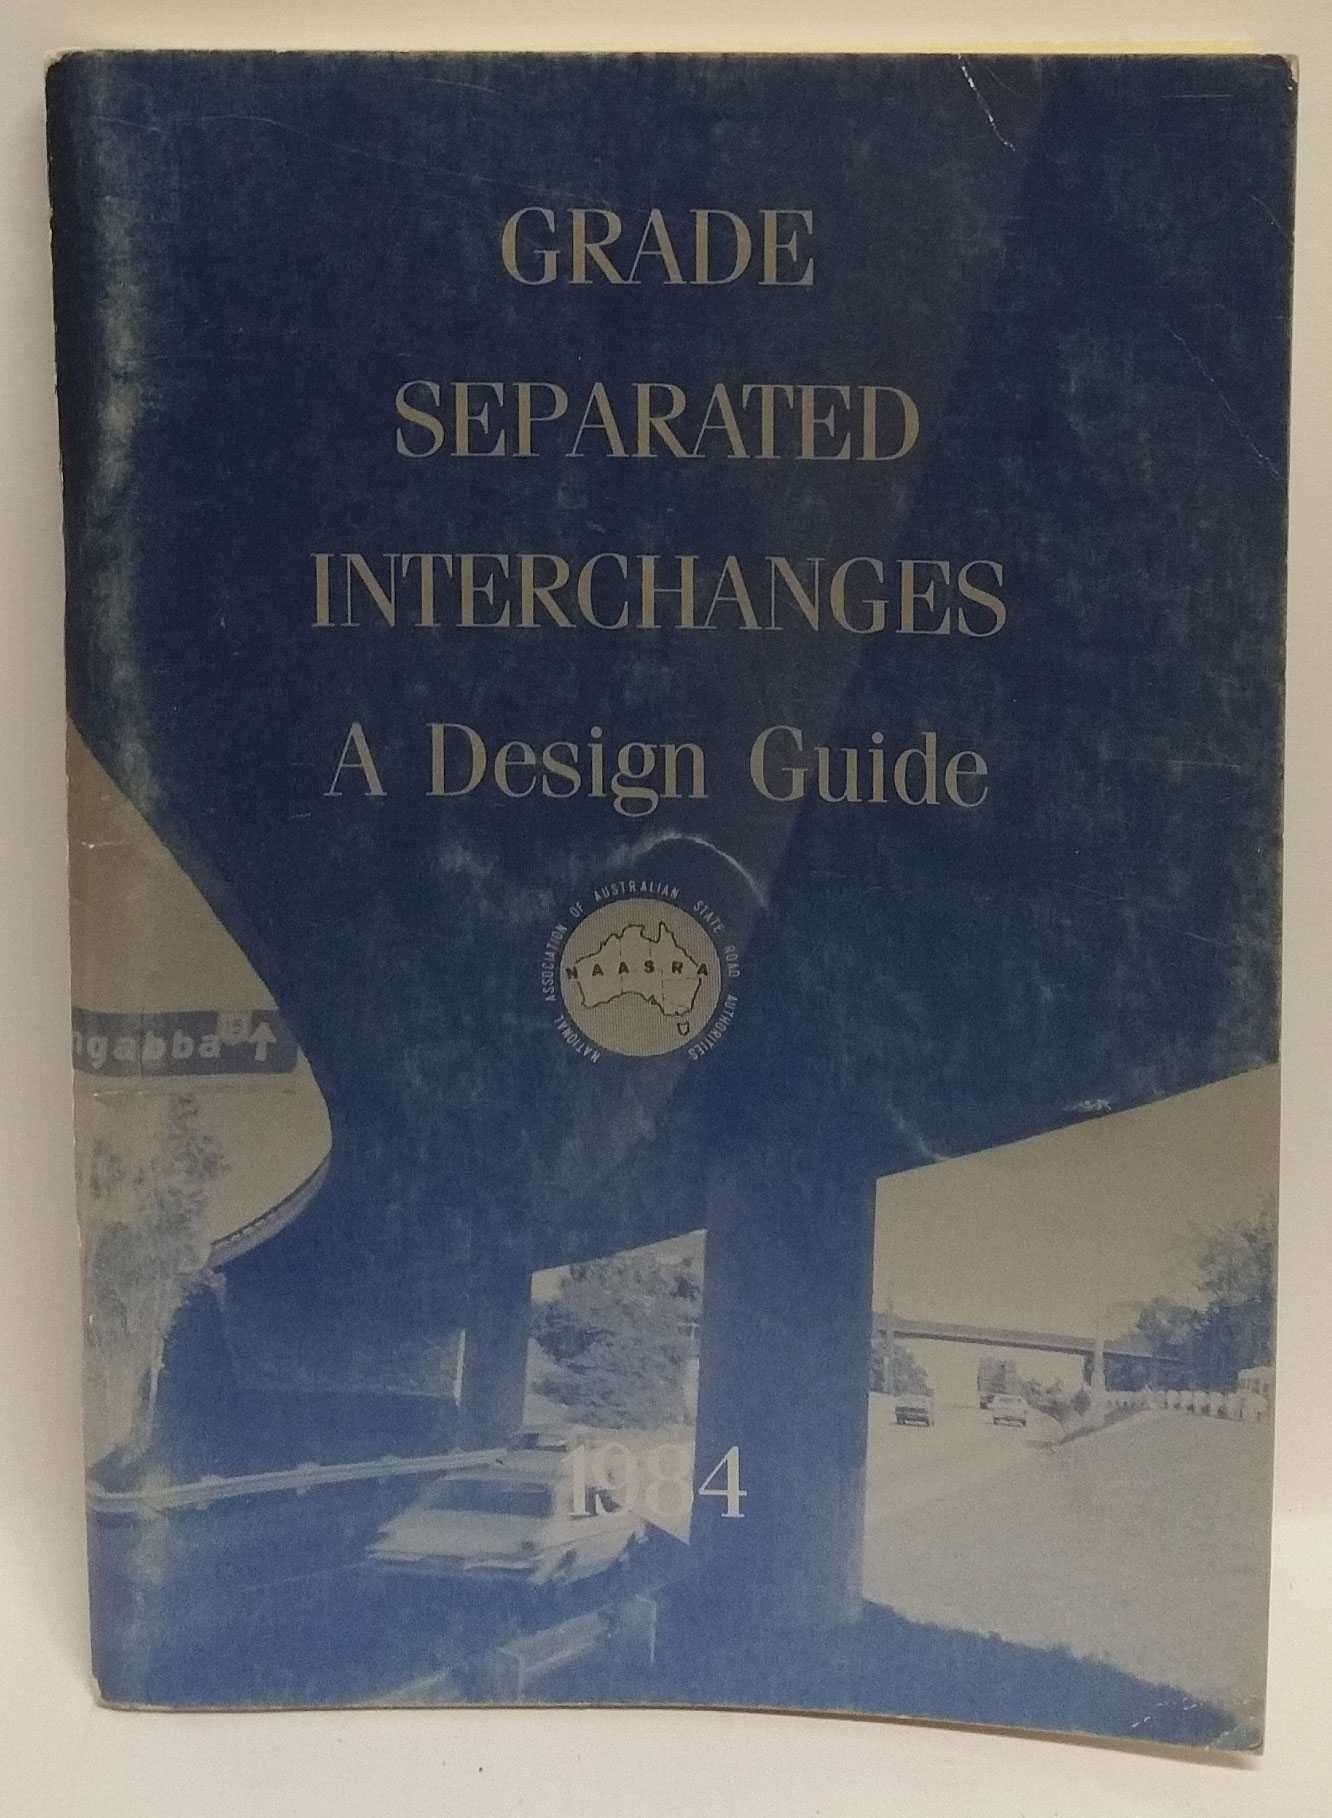 National Association of Australian State Road Authorities - Grade Separated Interchanges: A Design Guide